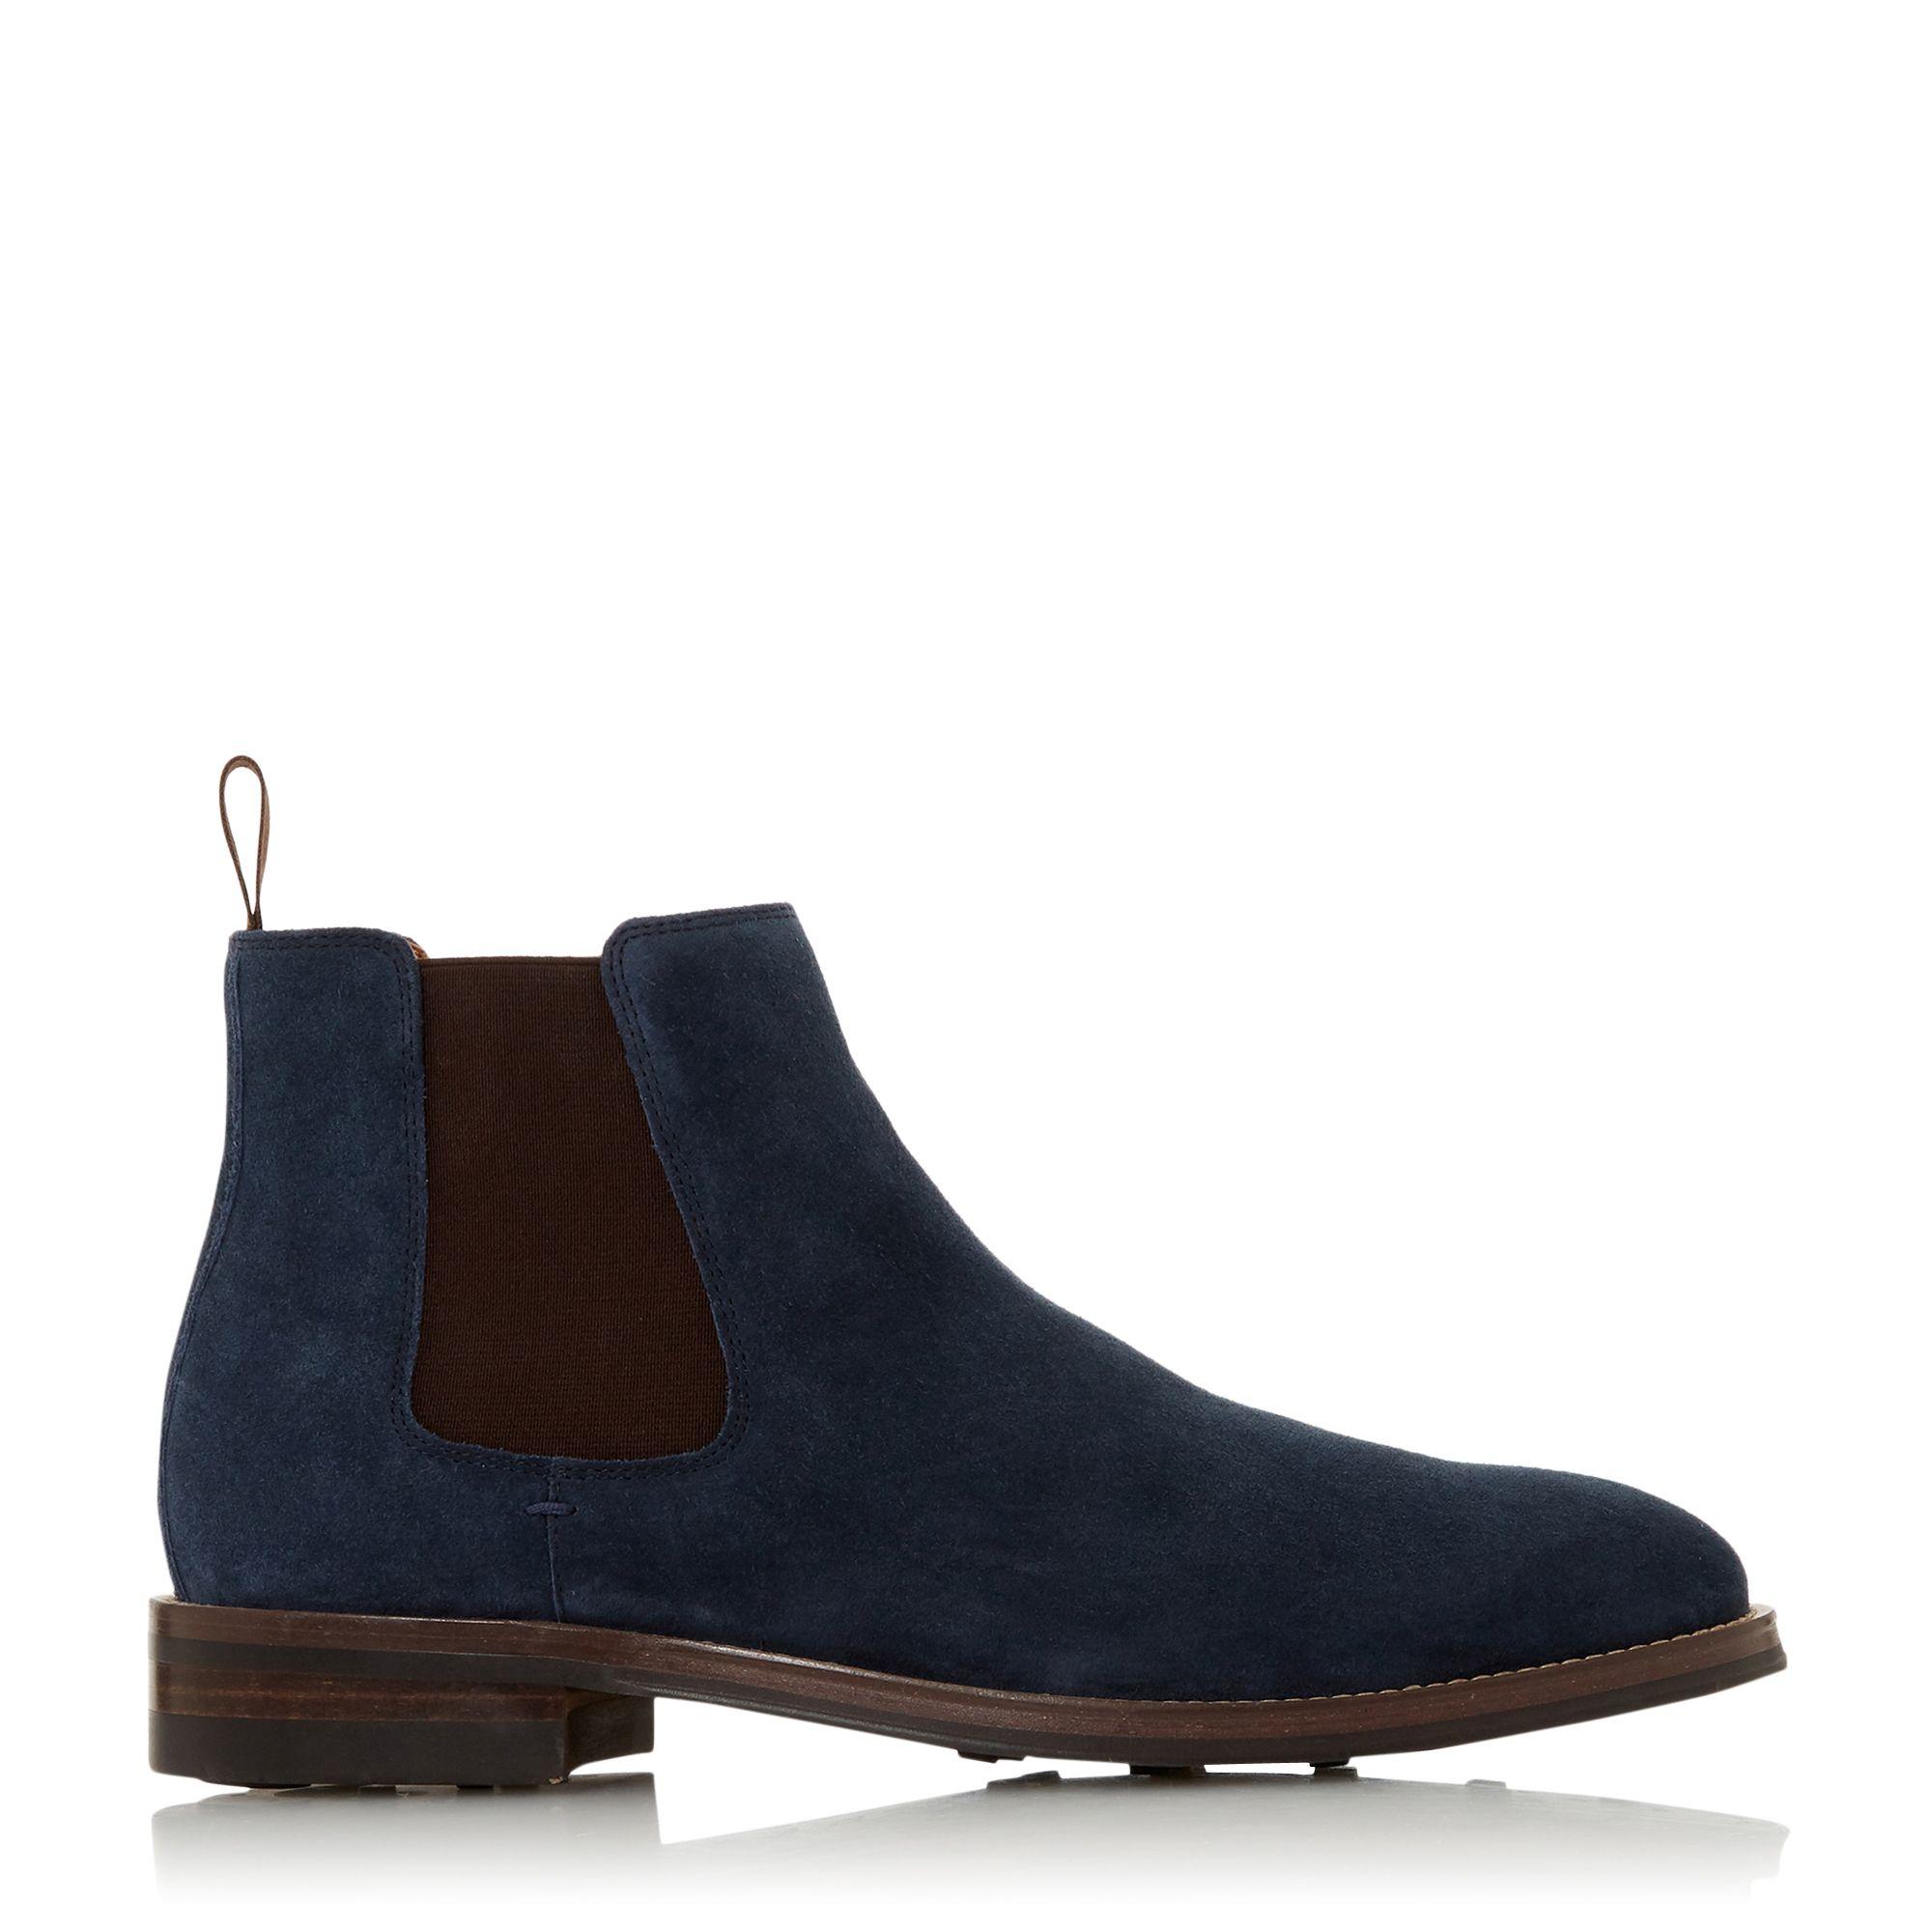 Dune Charltons Suede Chelsea Boots in Navy (Blue) for Men - Lyst